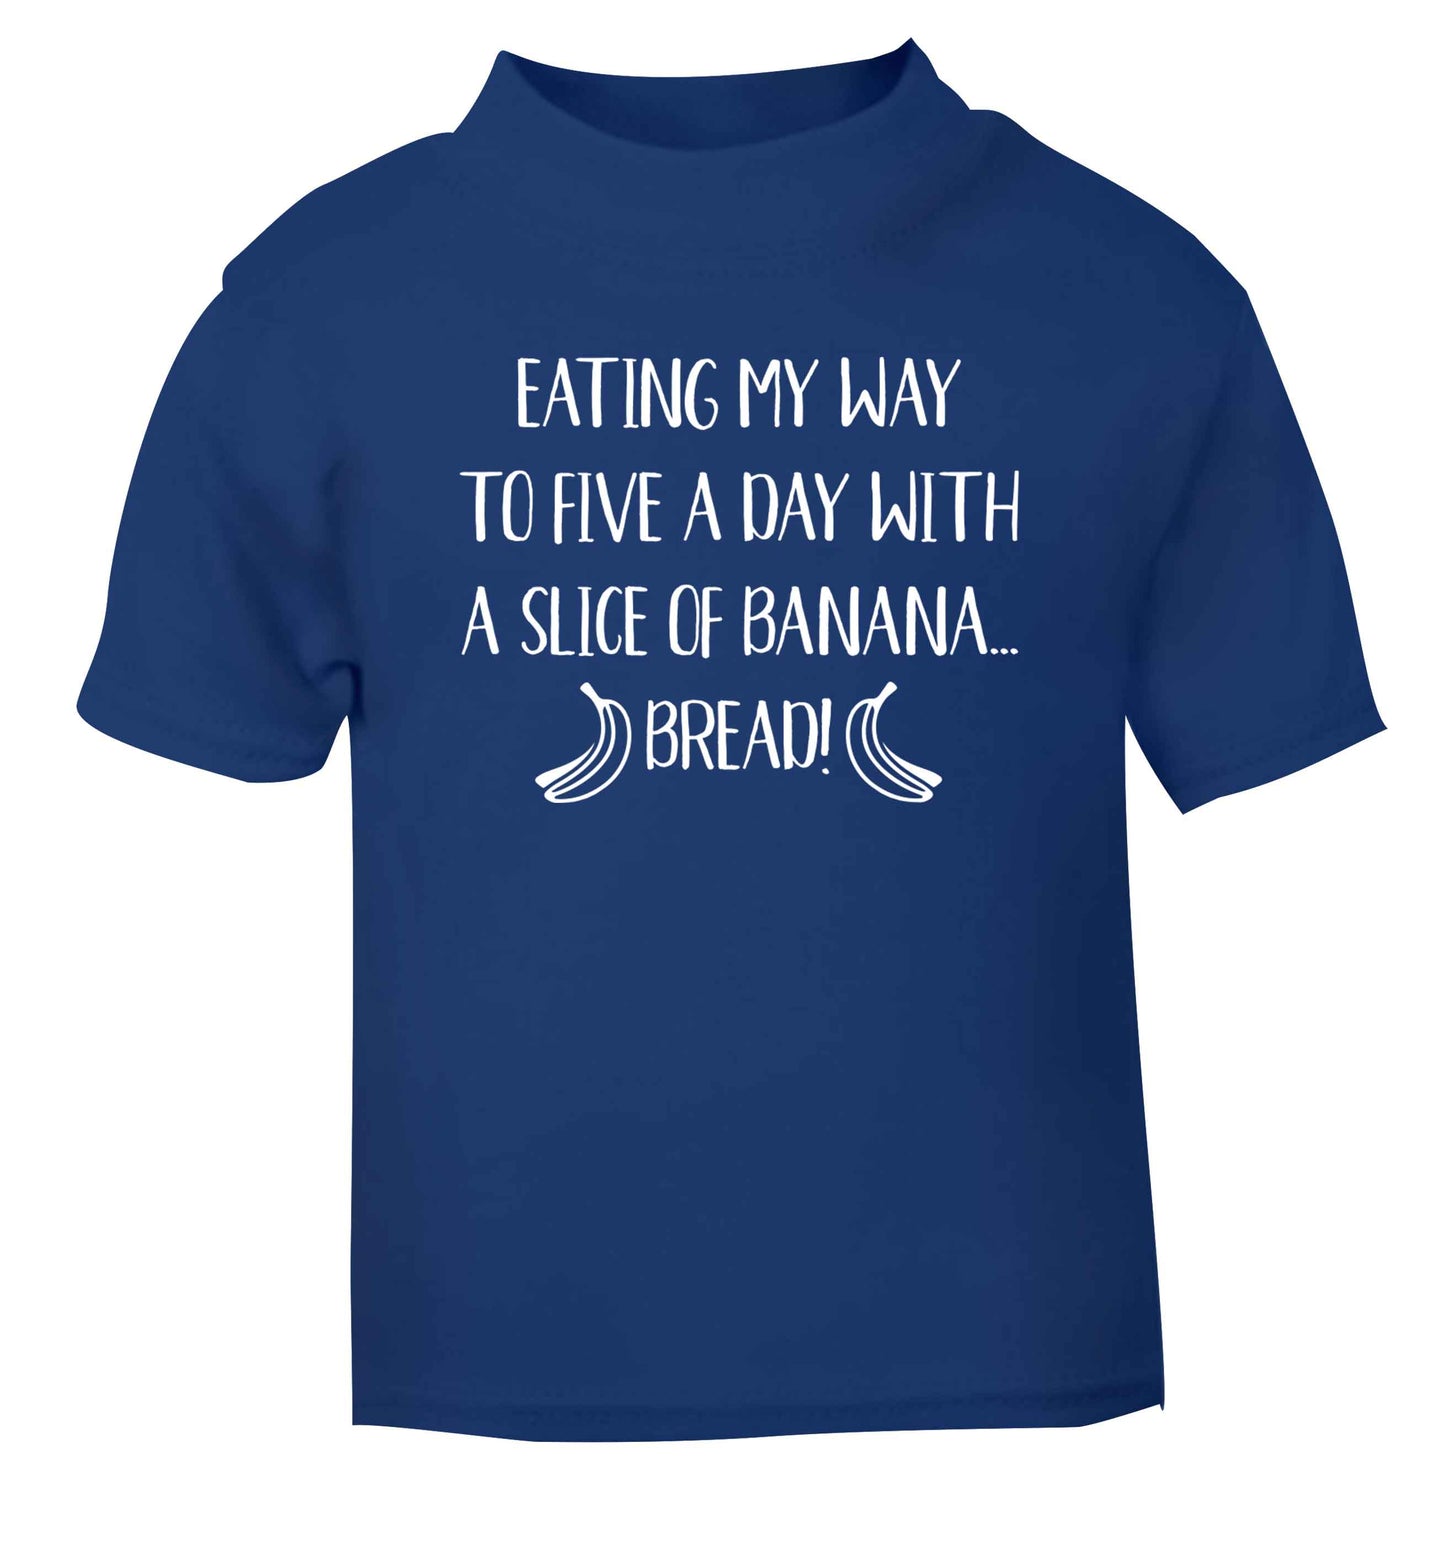 Eating my way to five a day with a slice of banana bread blue Baby Toddler Tshirt 2 Years